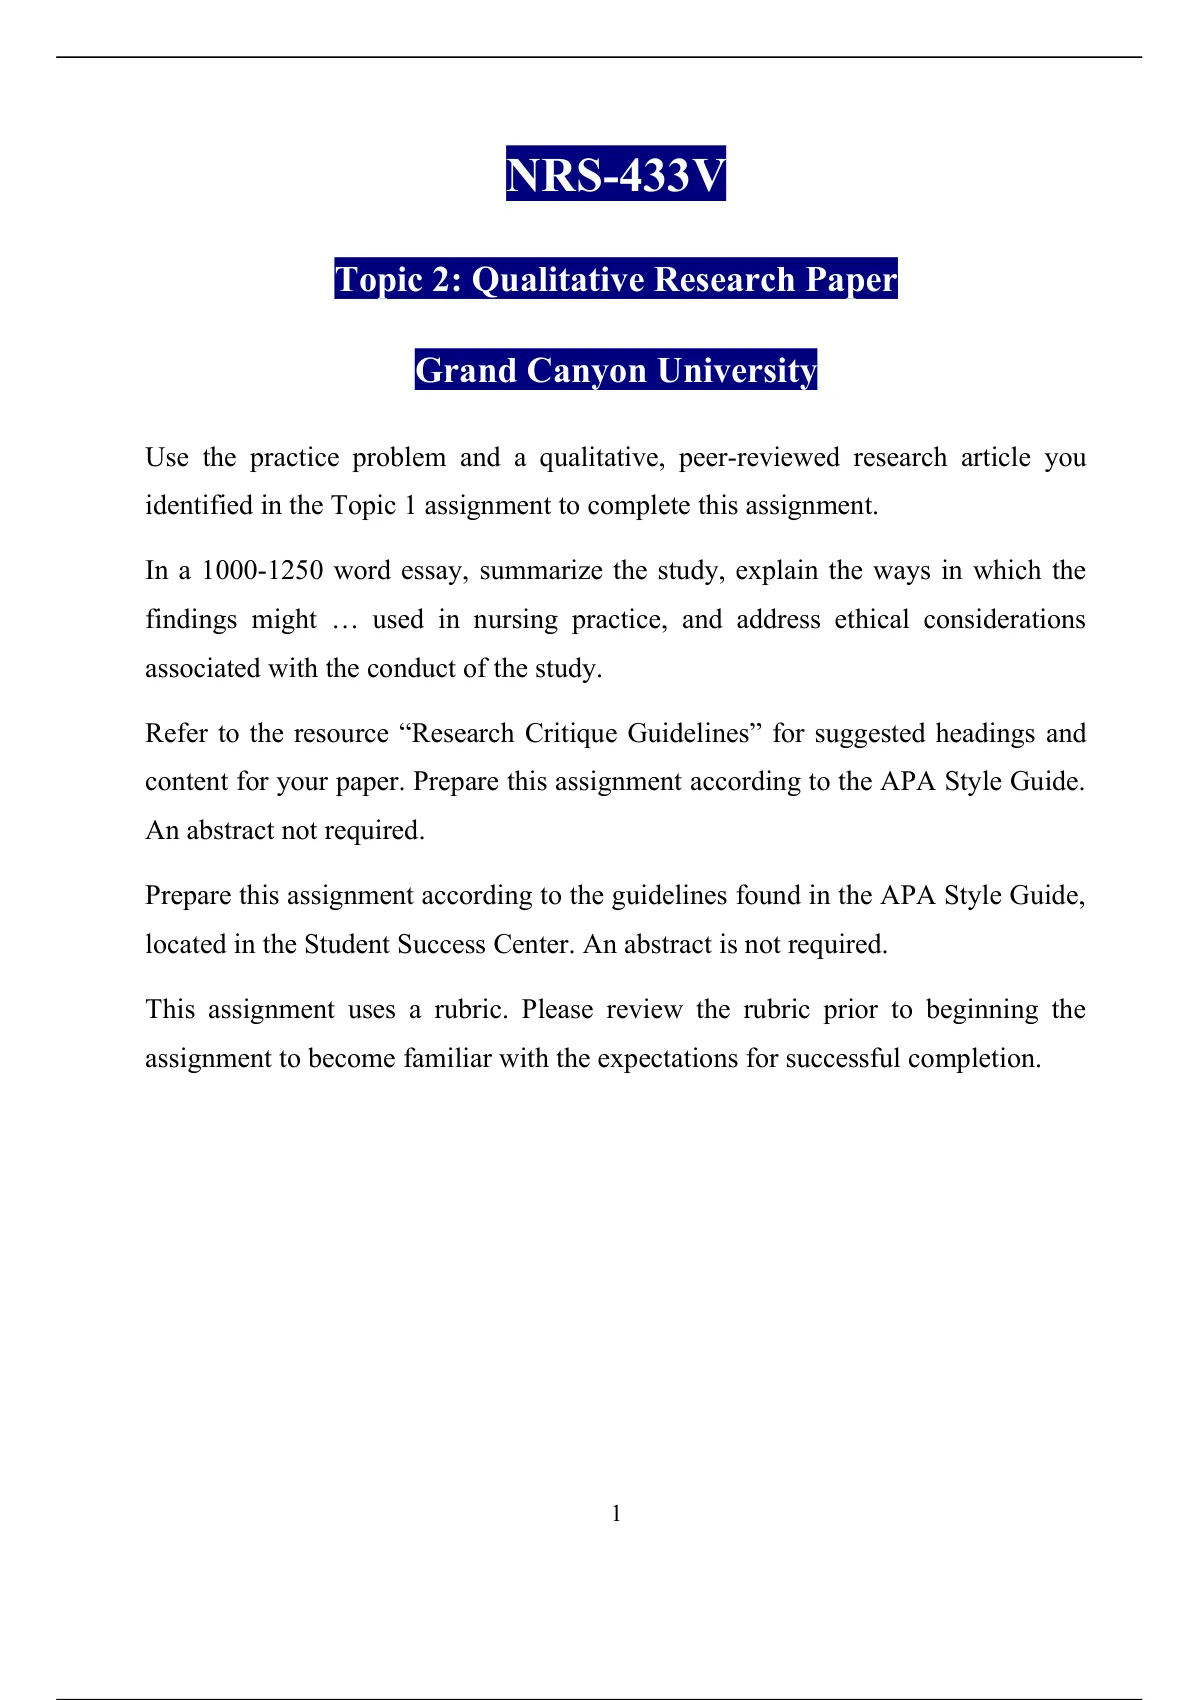 rough draft qualitative research critique and ethical considerations